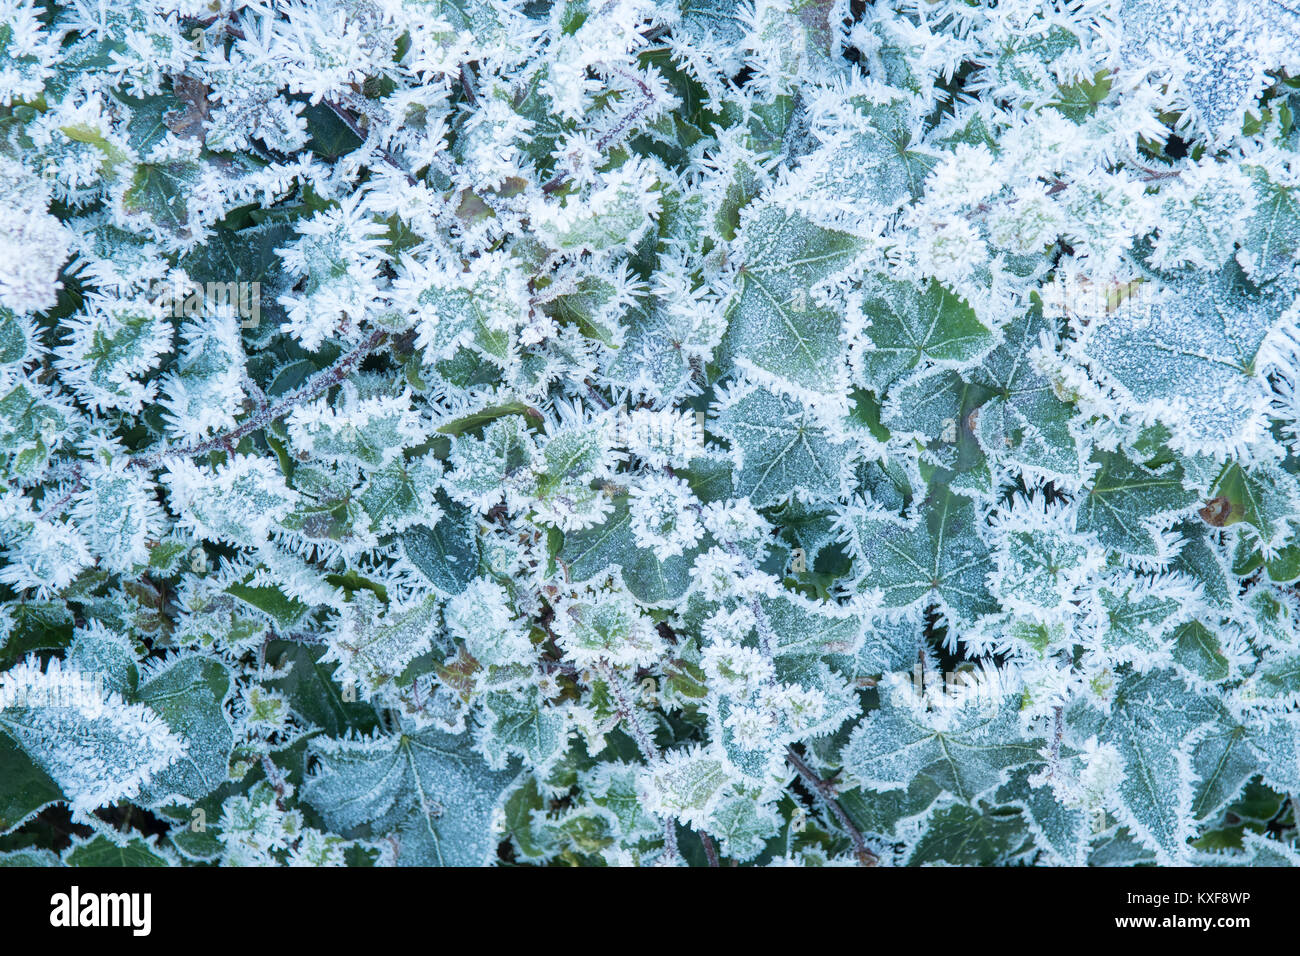 ivy covered in hoar frost - Scotland, UK Stock Photo